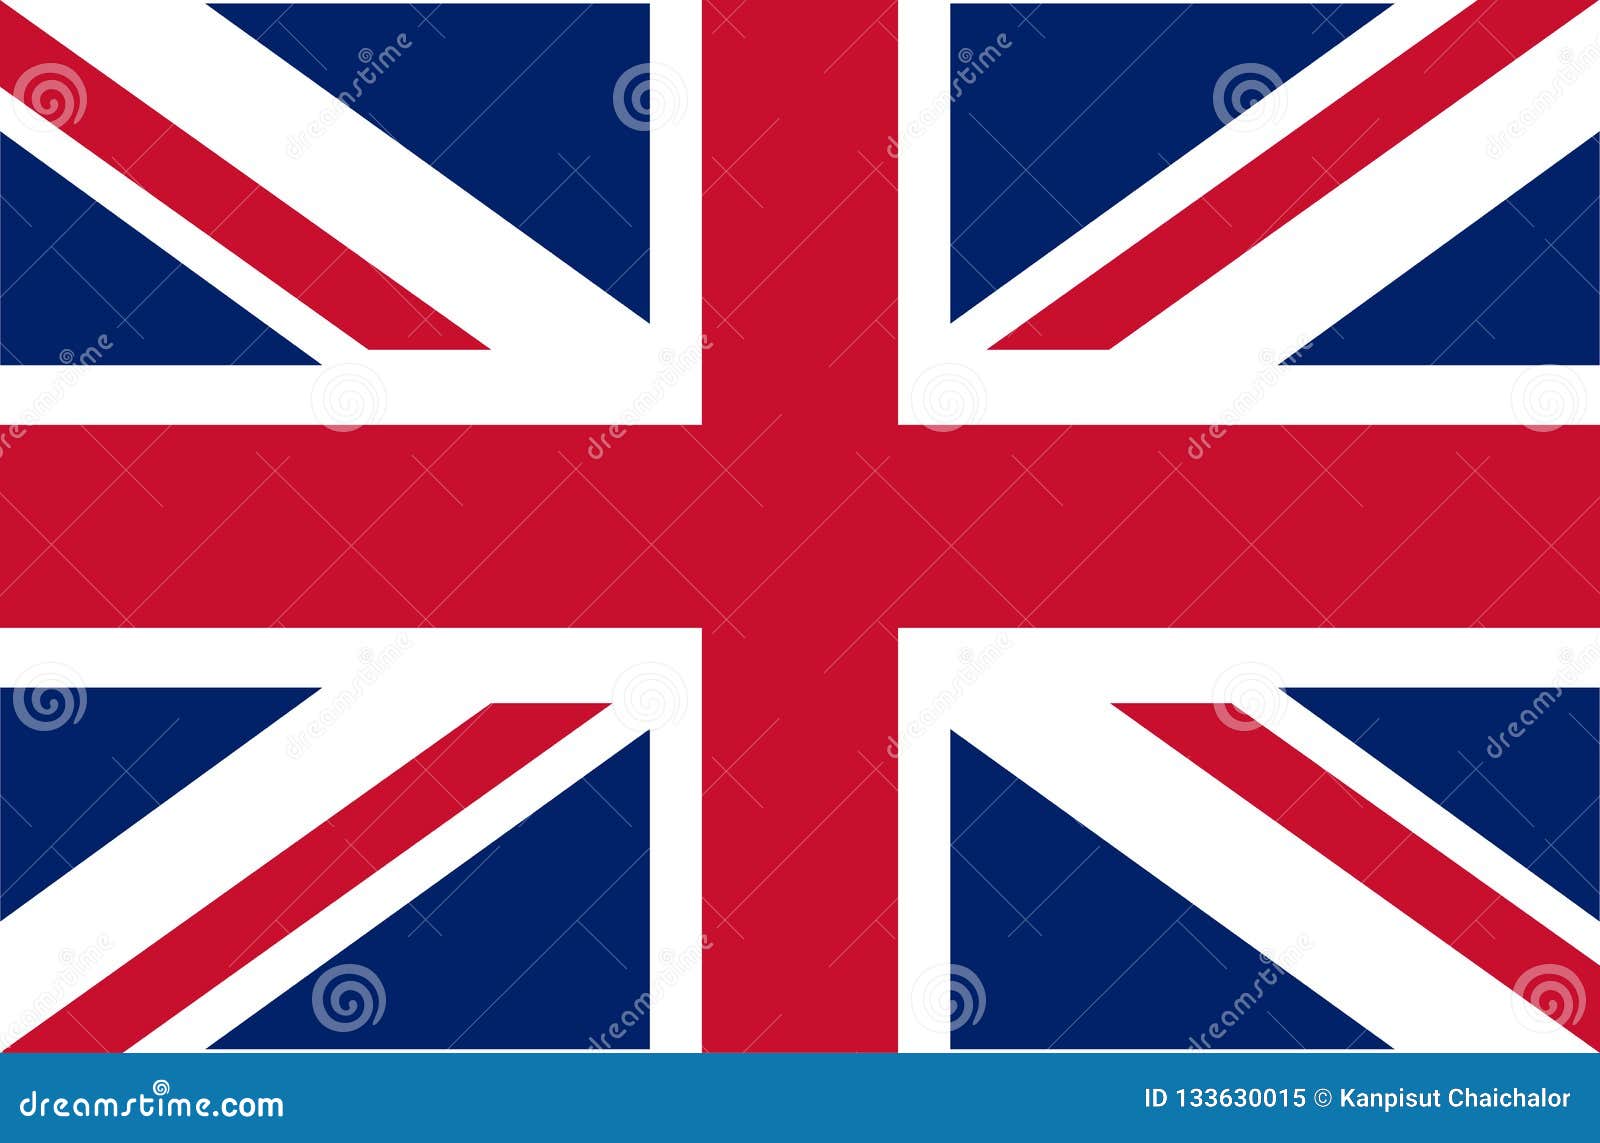 uk. union jack. flag of united kingdom. official colors. correct proportion.  . the british flag is flying in th